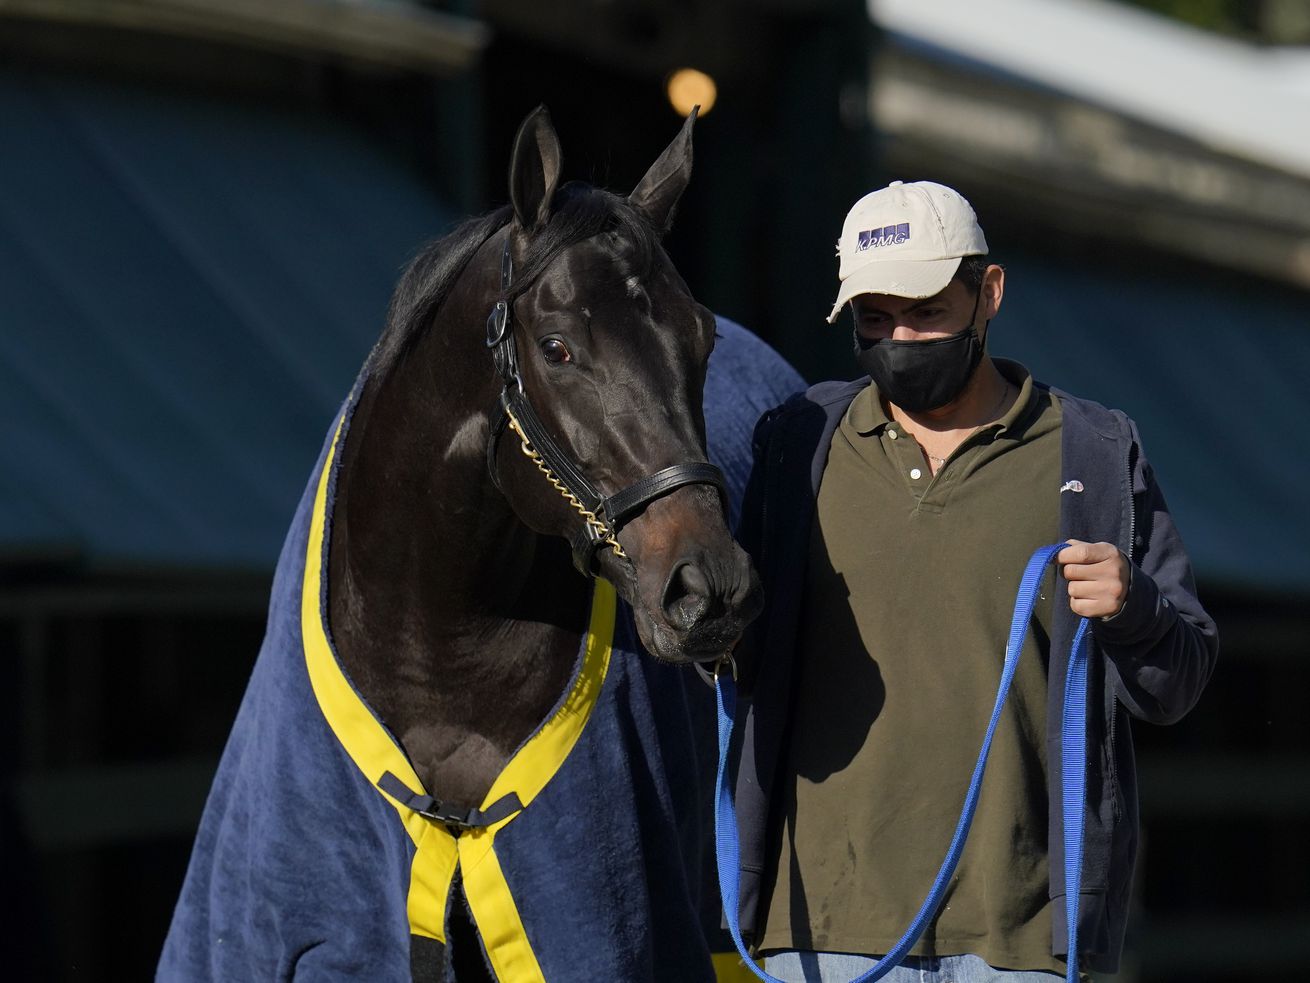 Kentucky Derby winner Medina Spirit is walked to be groomed after a morning exercise at Pimlico Race Course ahead of the Preakness Stakes.